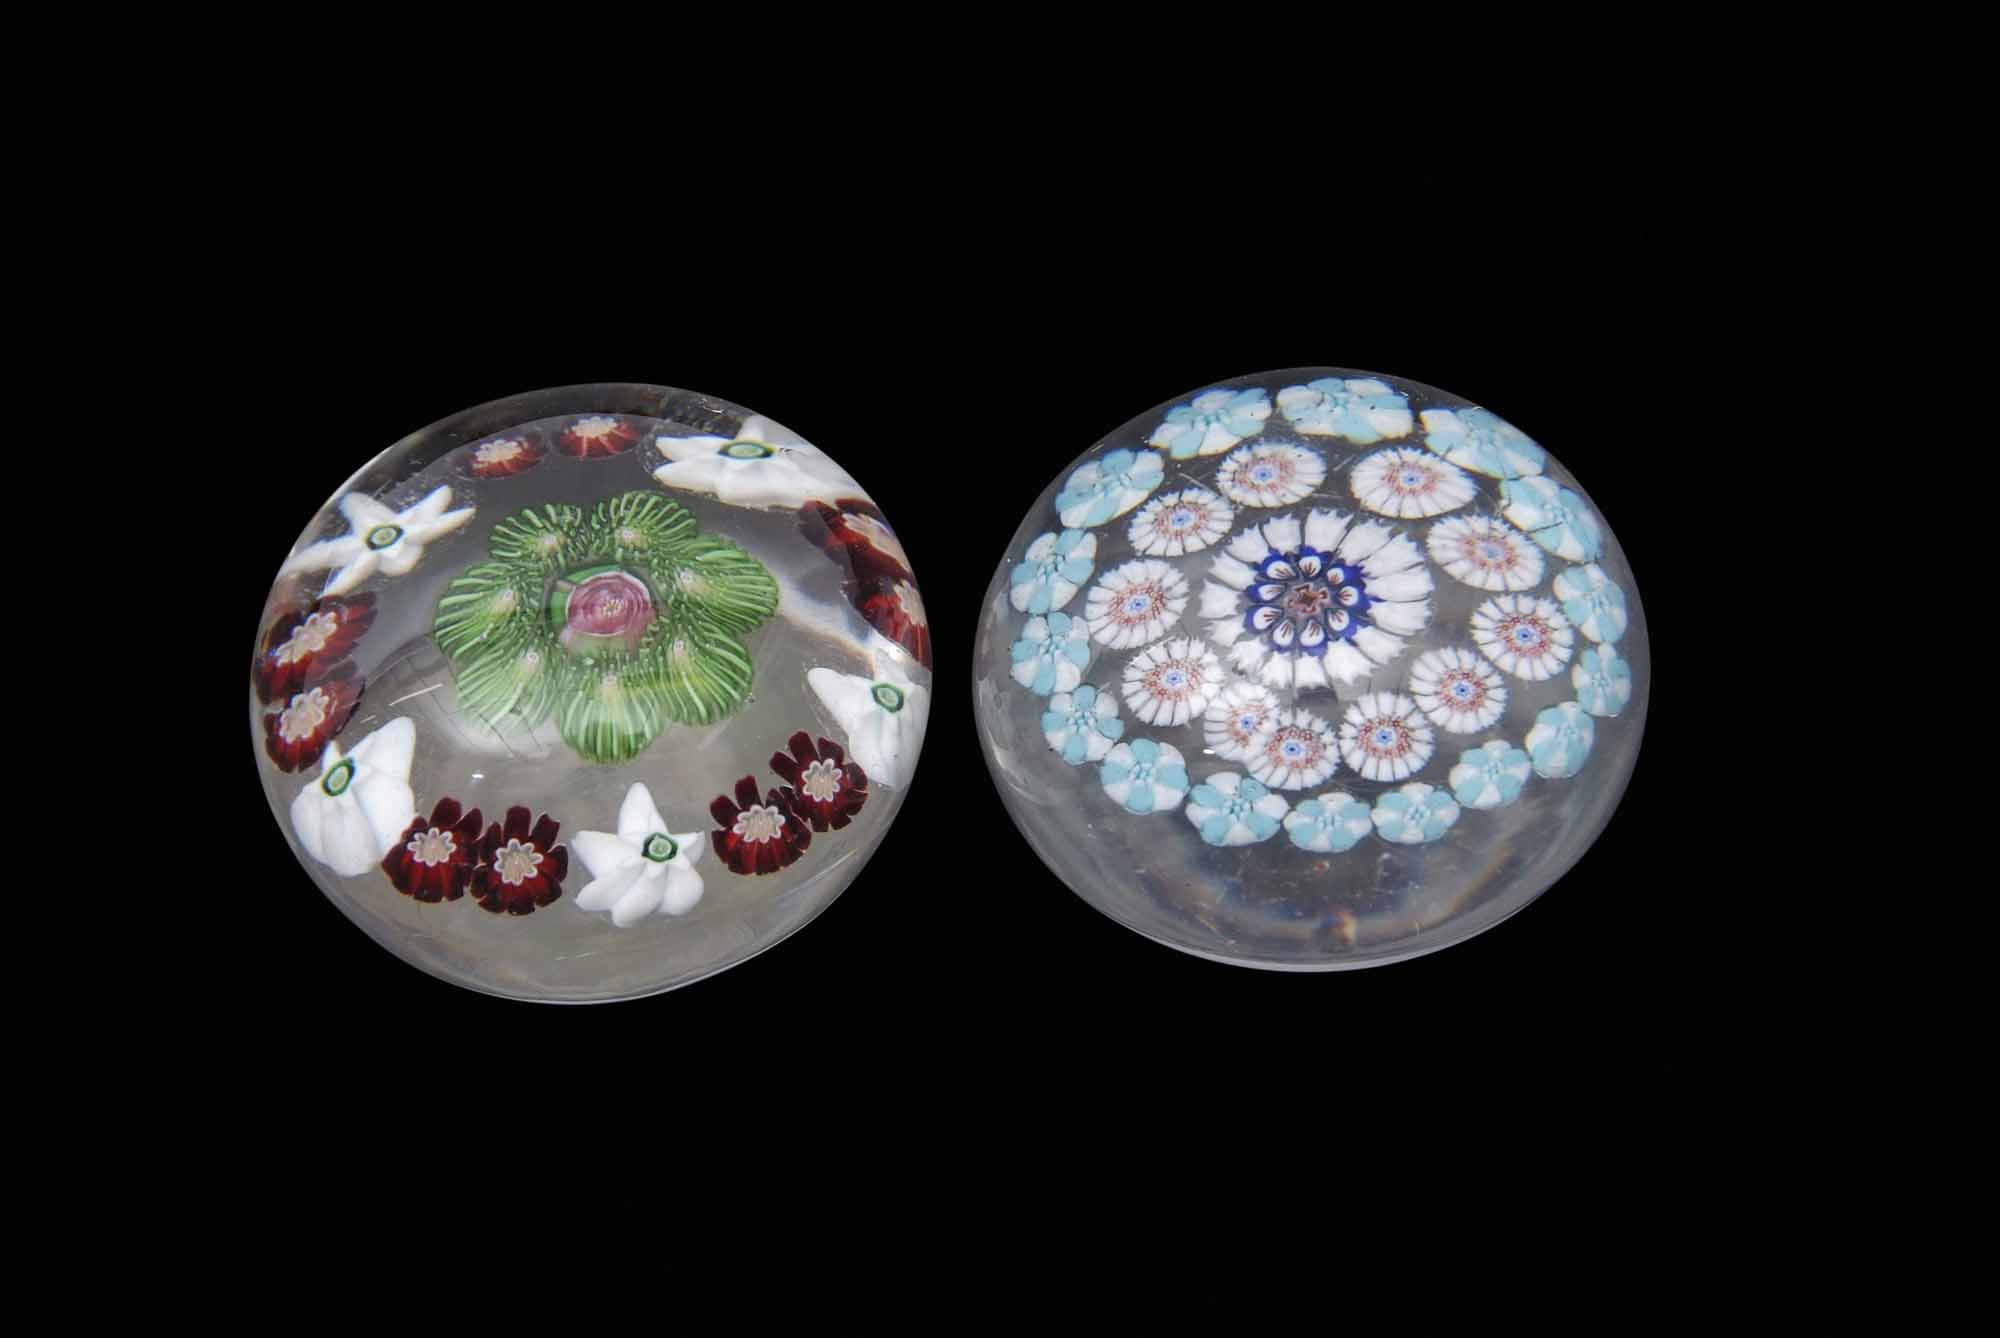 Clichy miniature concentric millefiori paperweight, clear glass with central pink and green rose